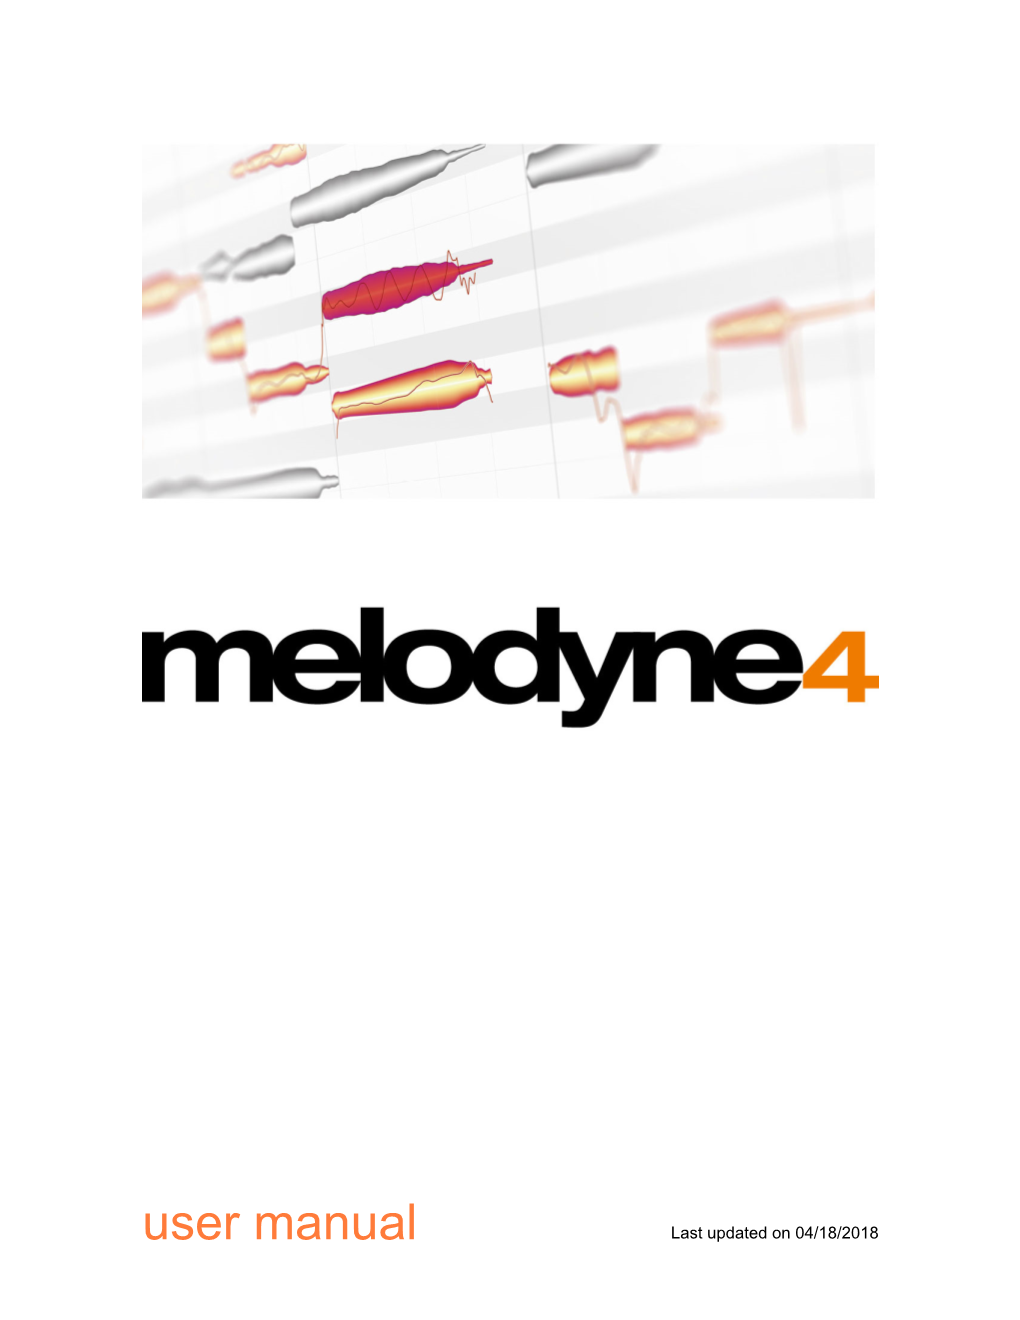 User Manual Last Updated on 04/18/2018 Melodyne 4 Editor